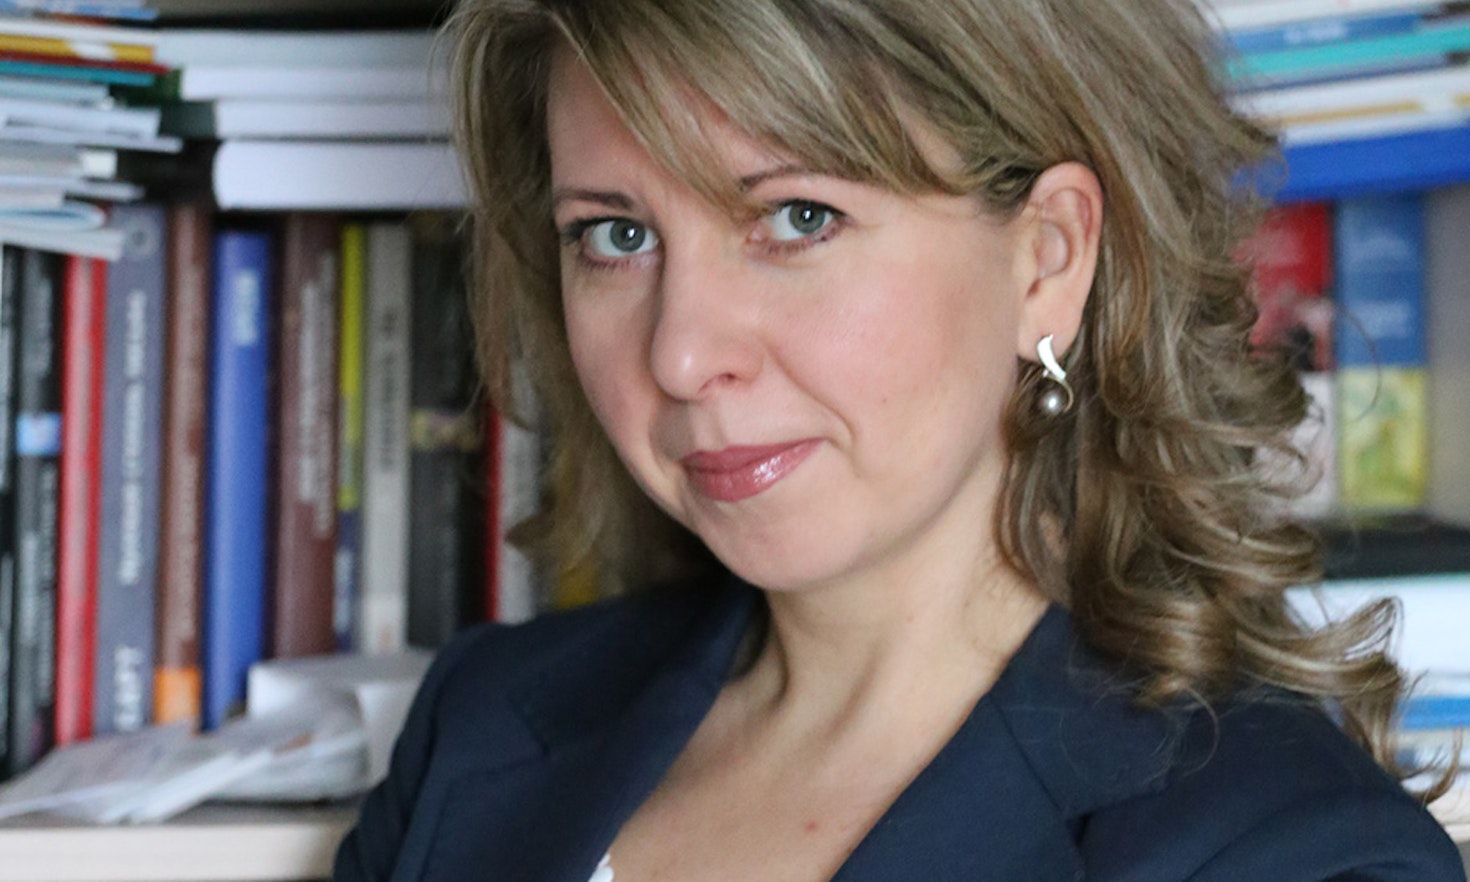 From Russia with love: Is Covid-19 shaping the EU and Russia’s future relations? An interview with Elena Alekseenkova